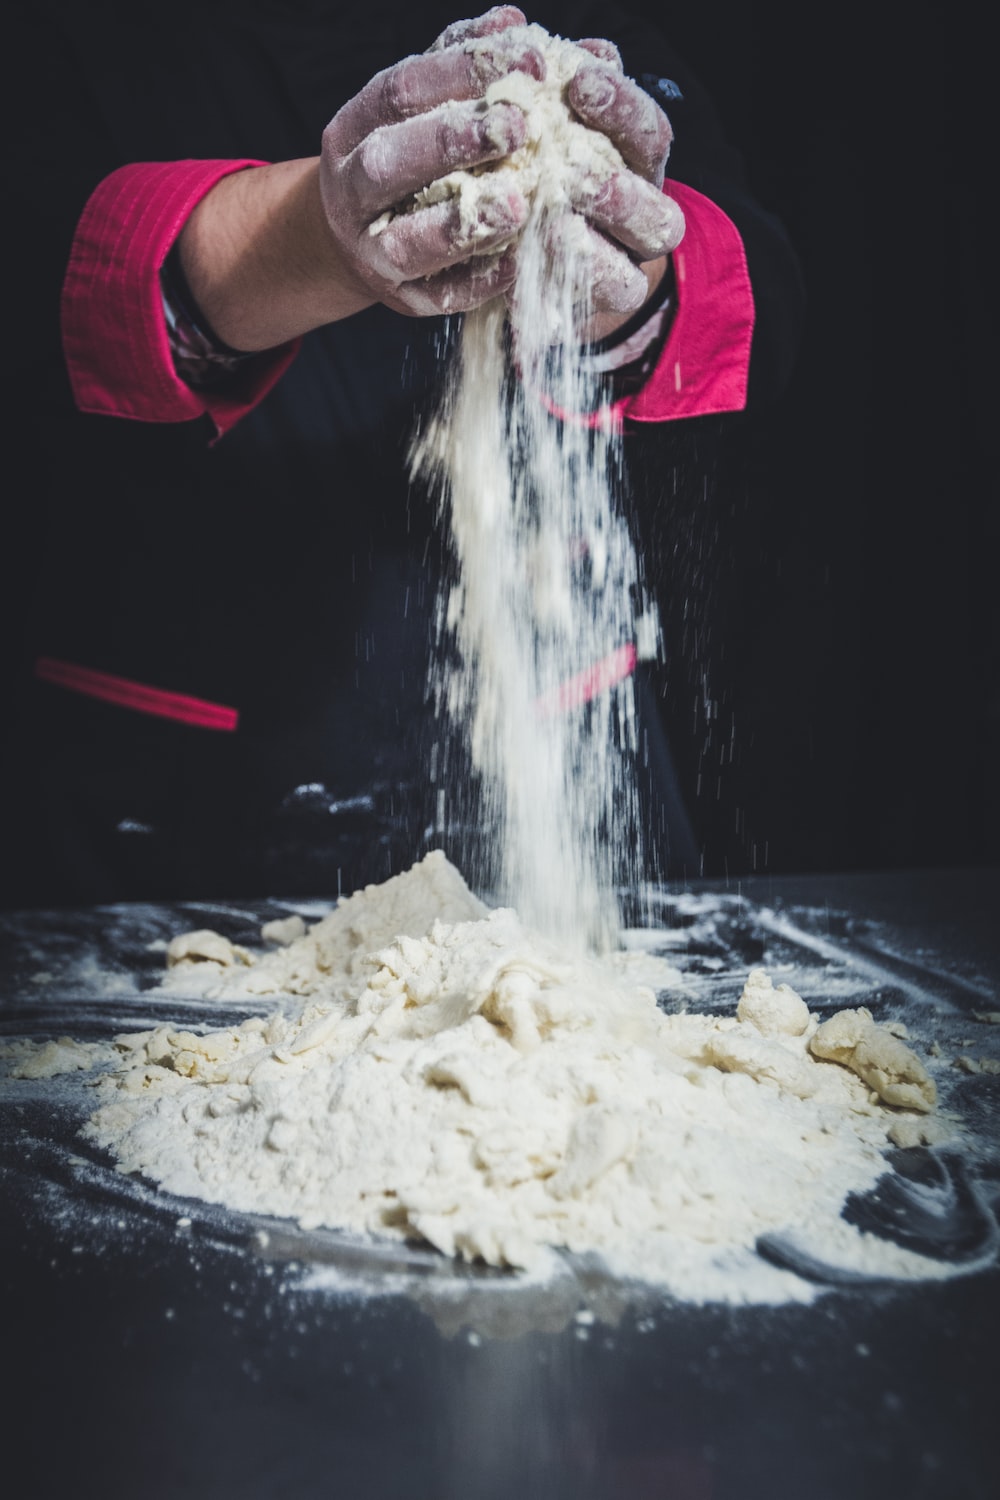 Wheat Flour Picture. Download Free Image